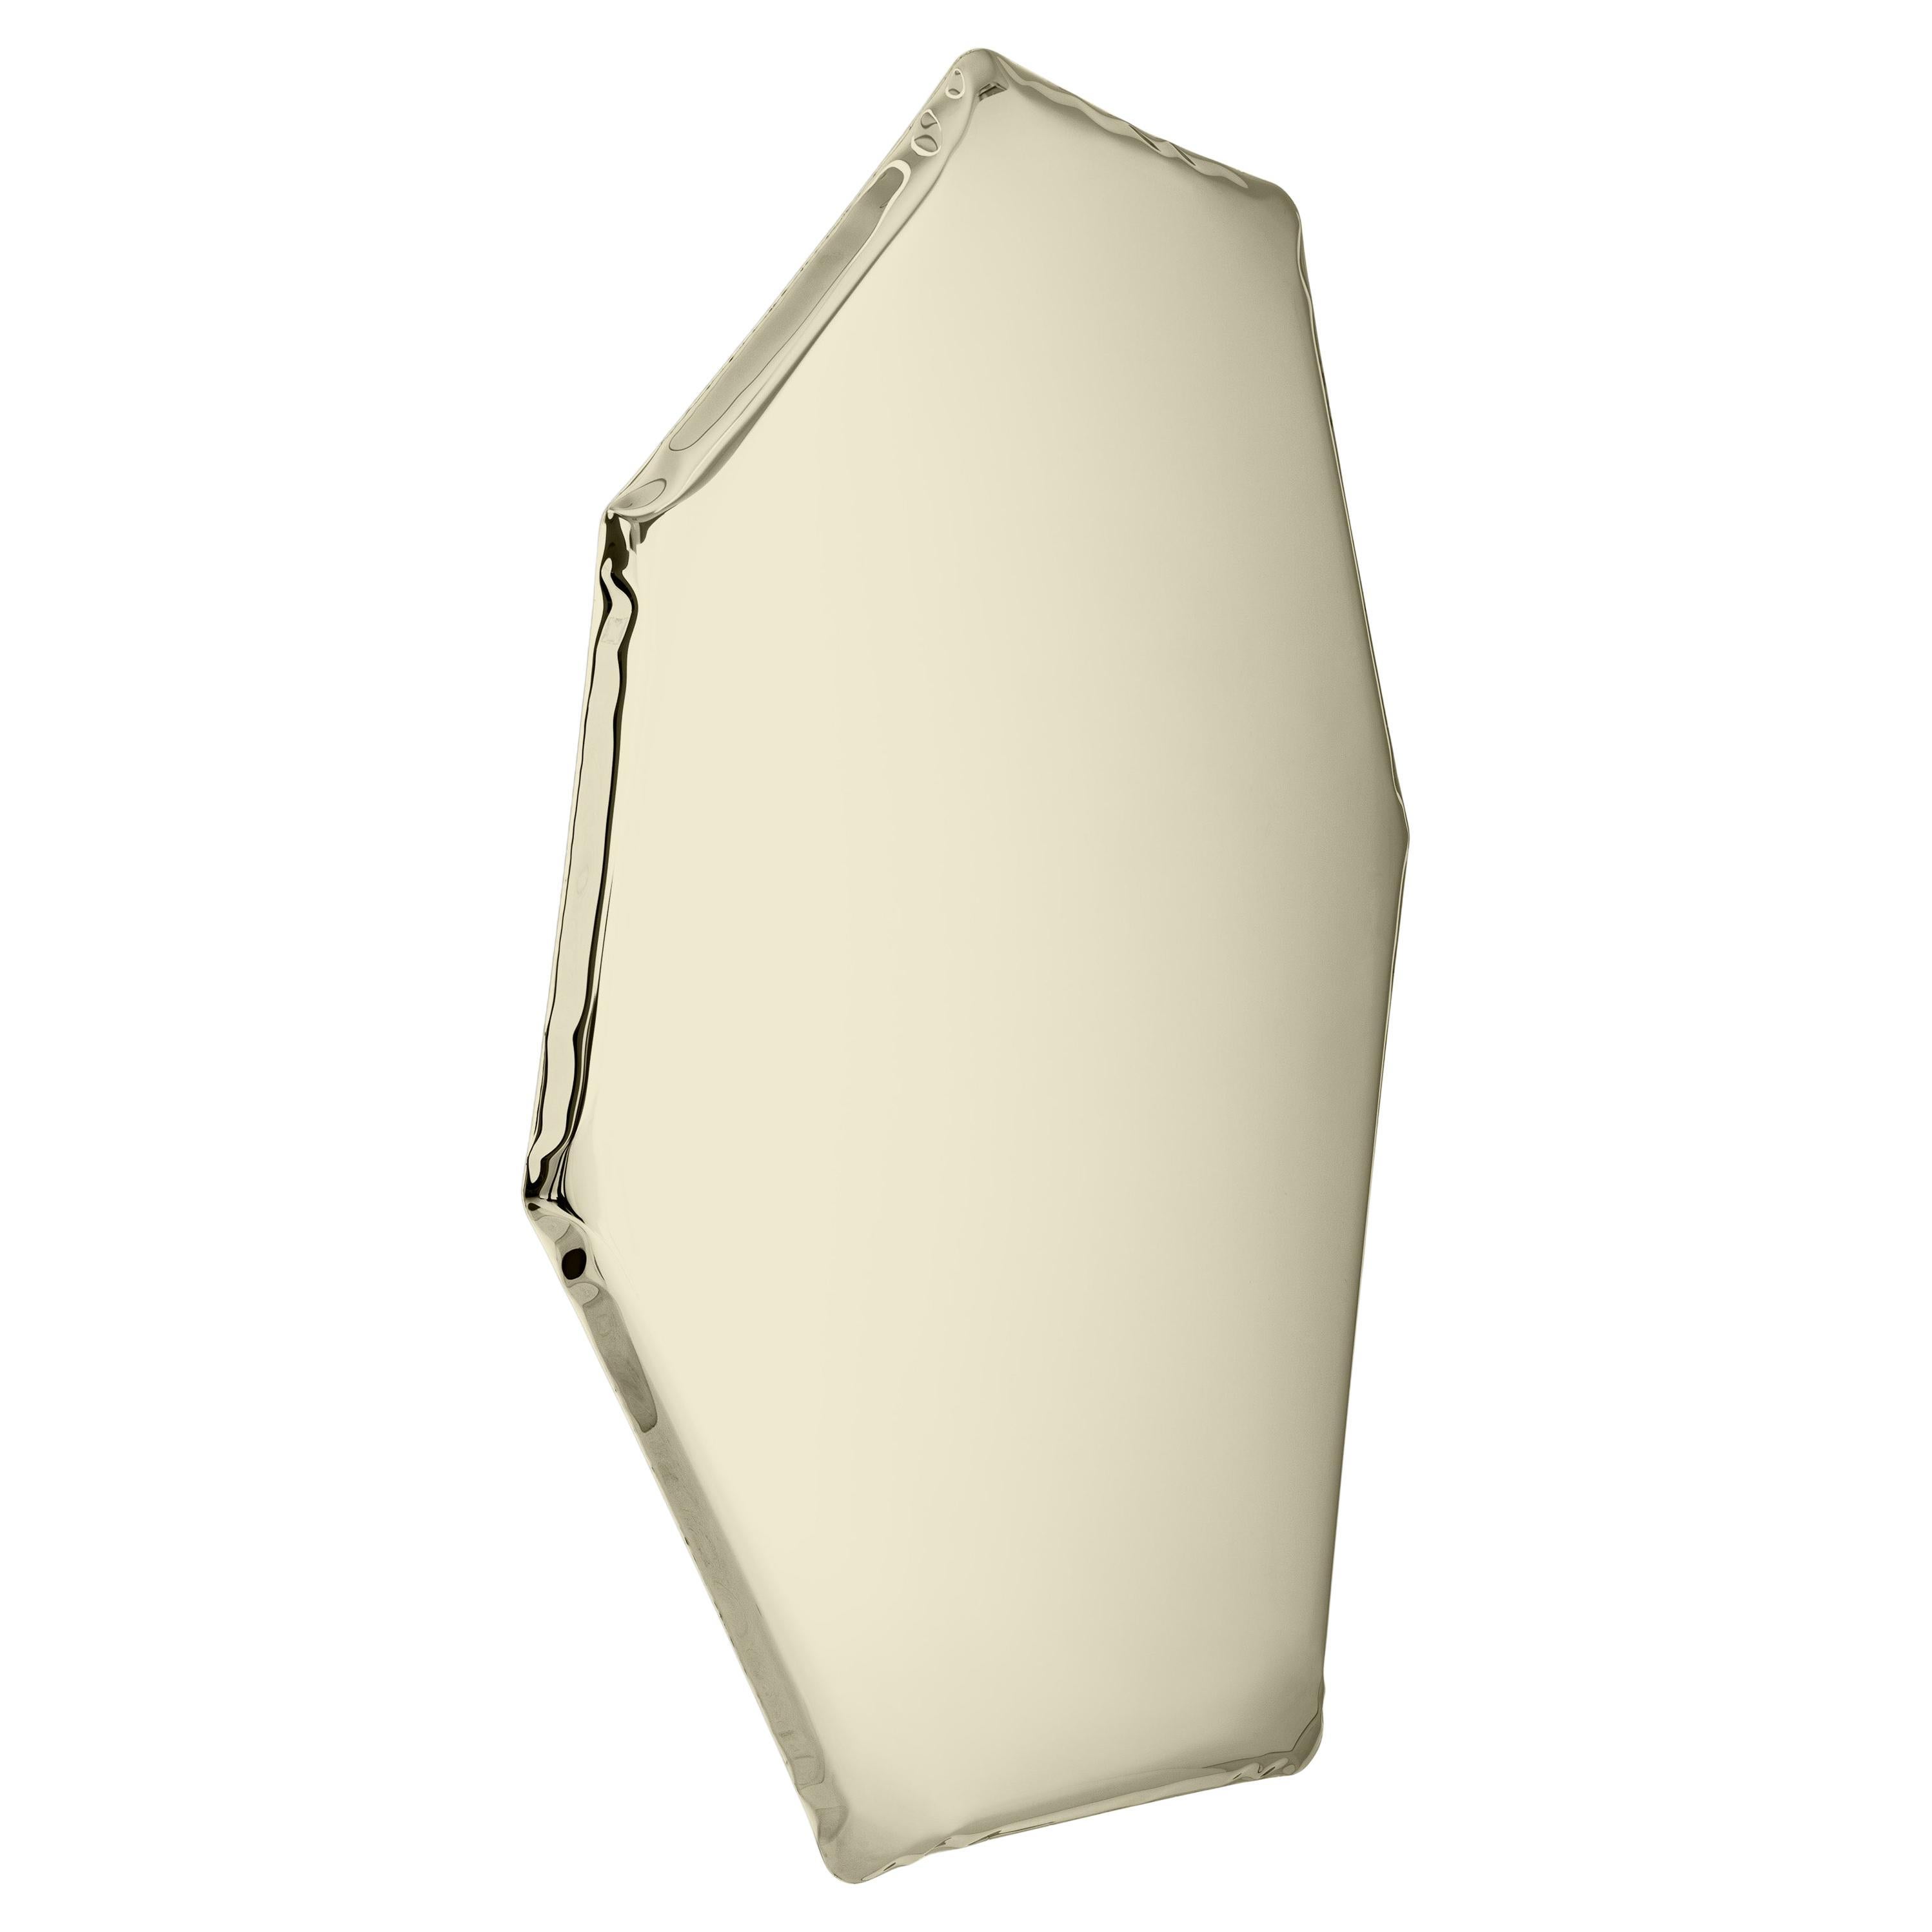 Tafla C2 Polished Stainless Steel Light Gold Color Wall Mirror by Zieta For Sale